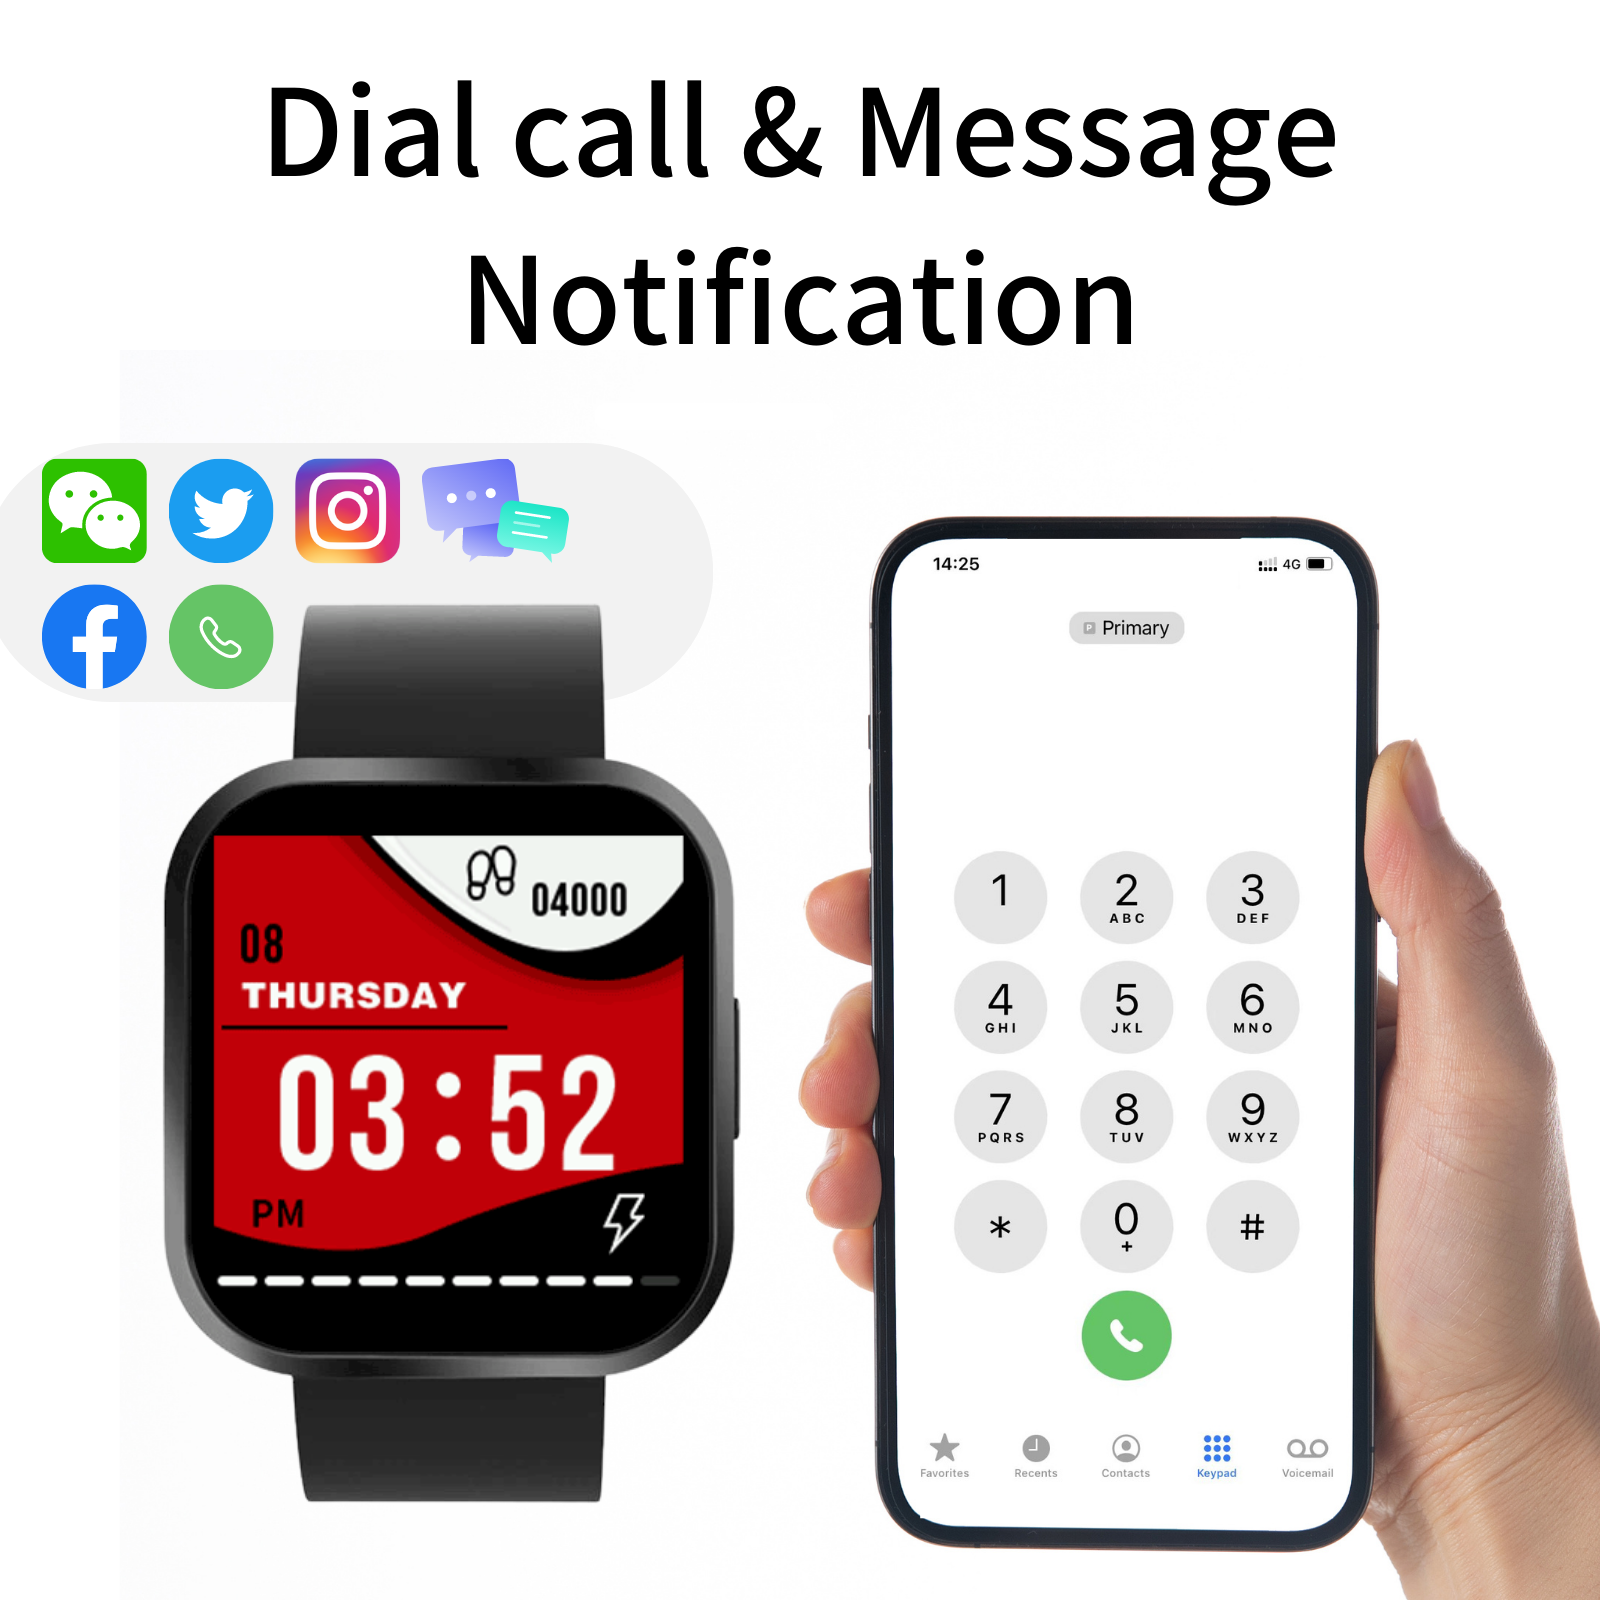 Dial call & Message Notification (1)